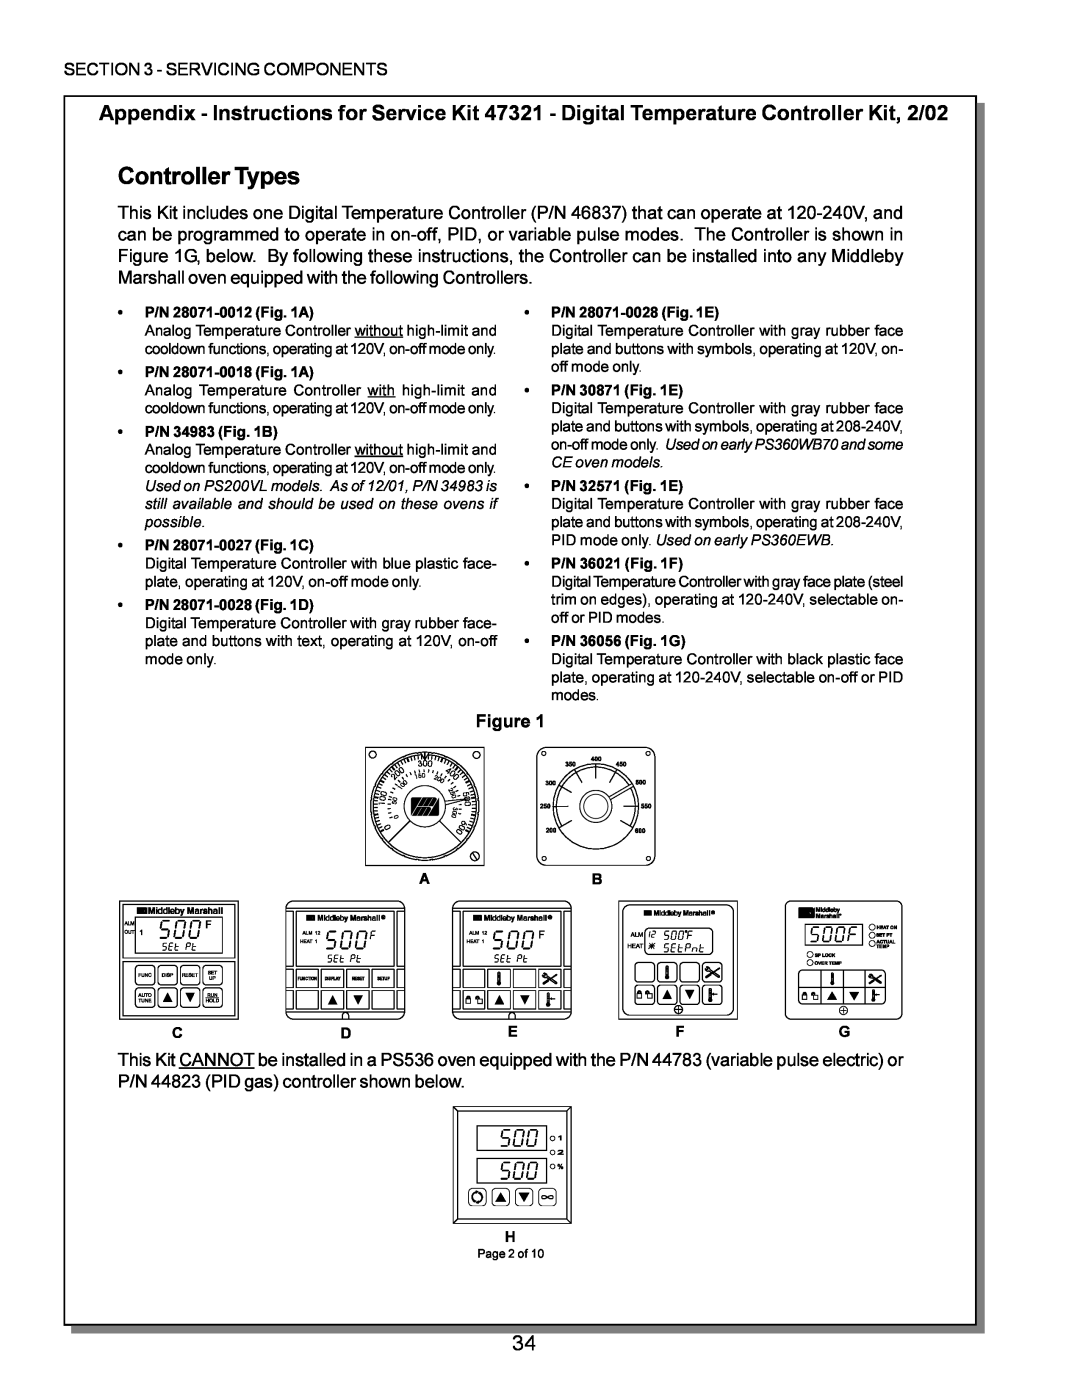 Middleby Marshall PS224 PS310, PS570, PS360, PS200, PS555, PS220 manual Controller Types 